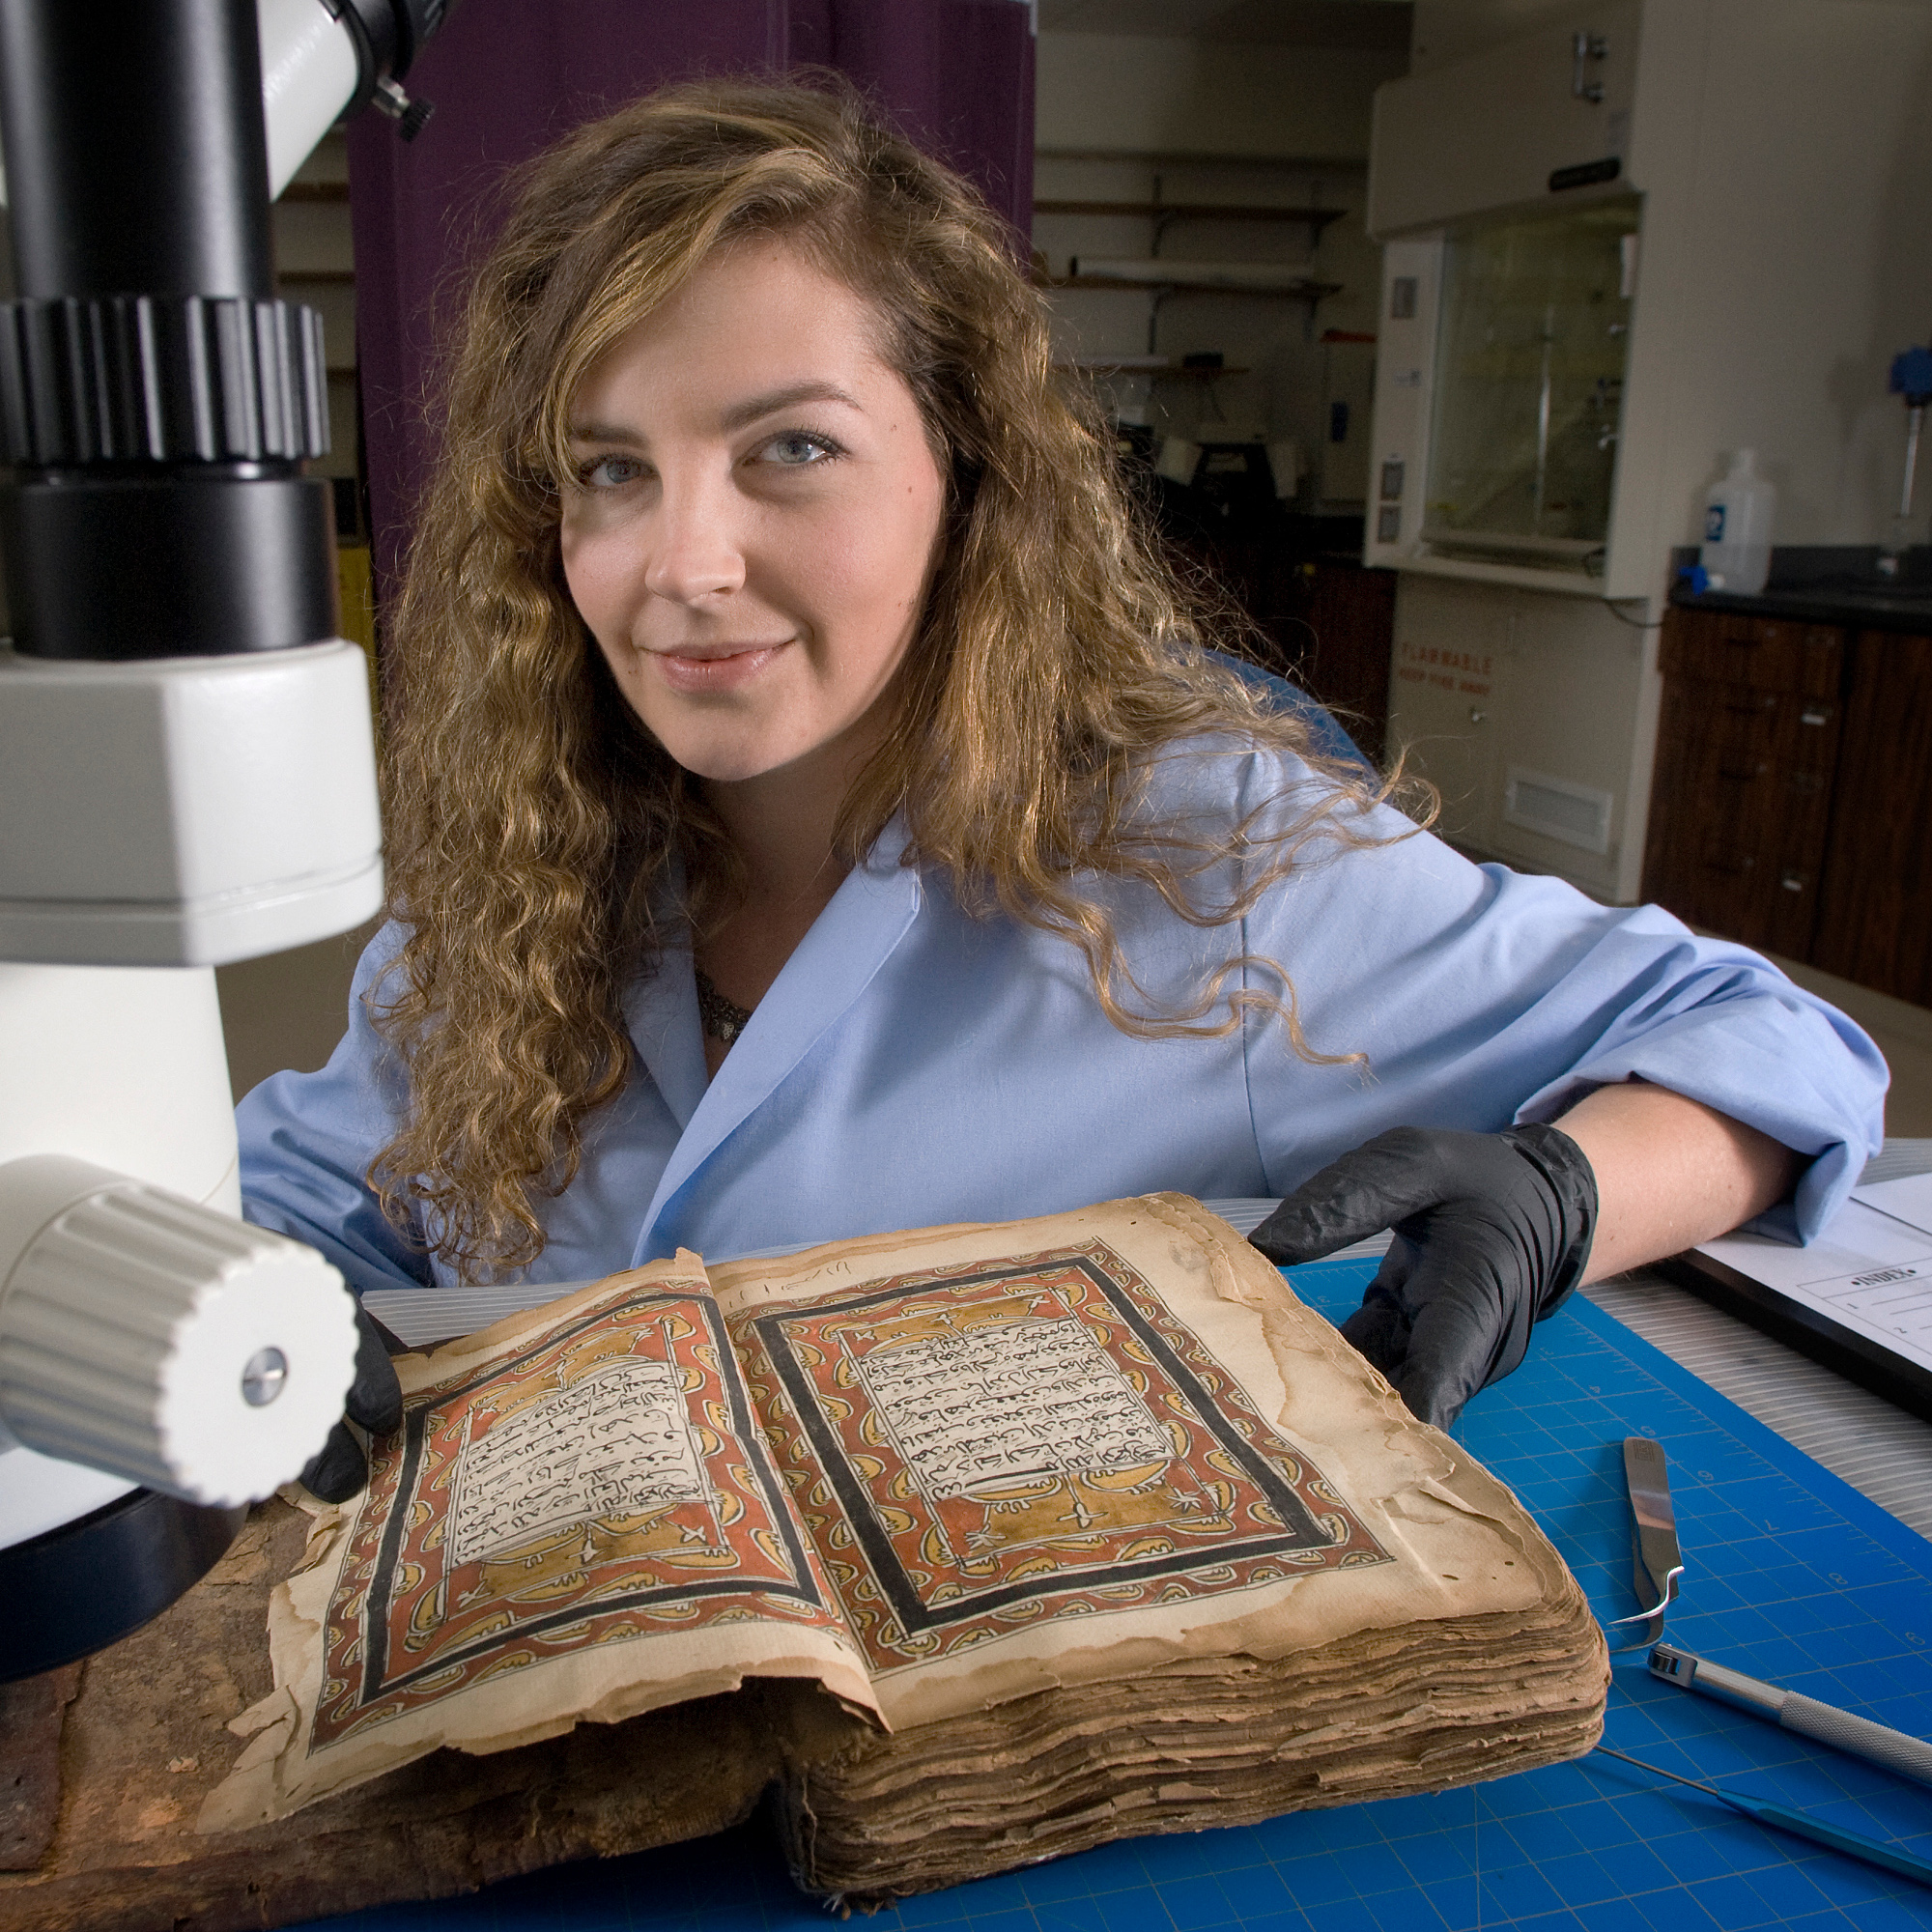 Natasja holding illustrated manuscript with microscope in the foreground